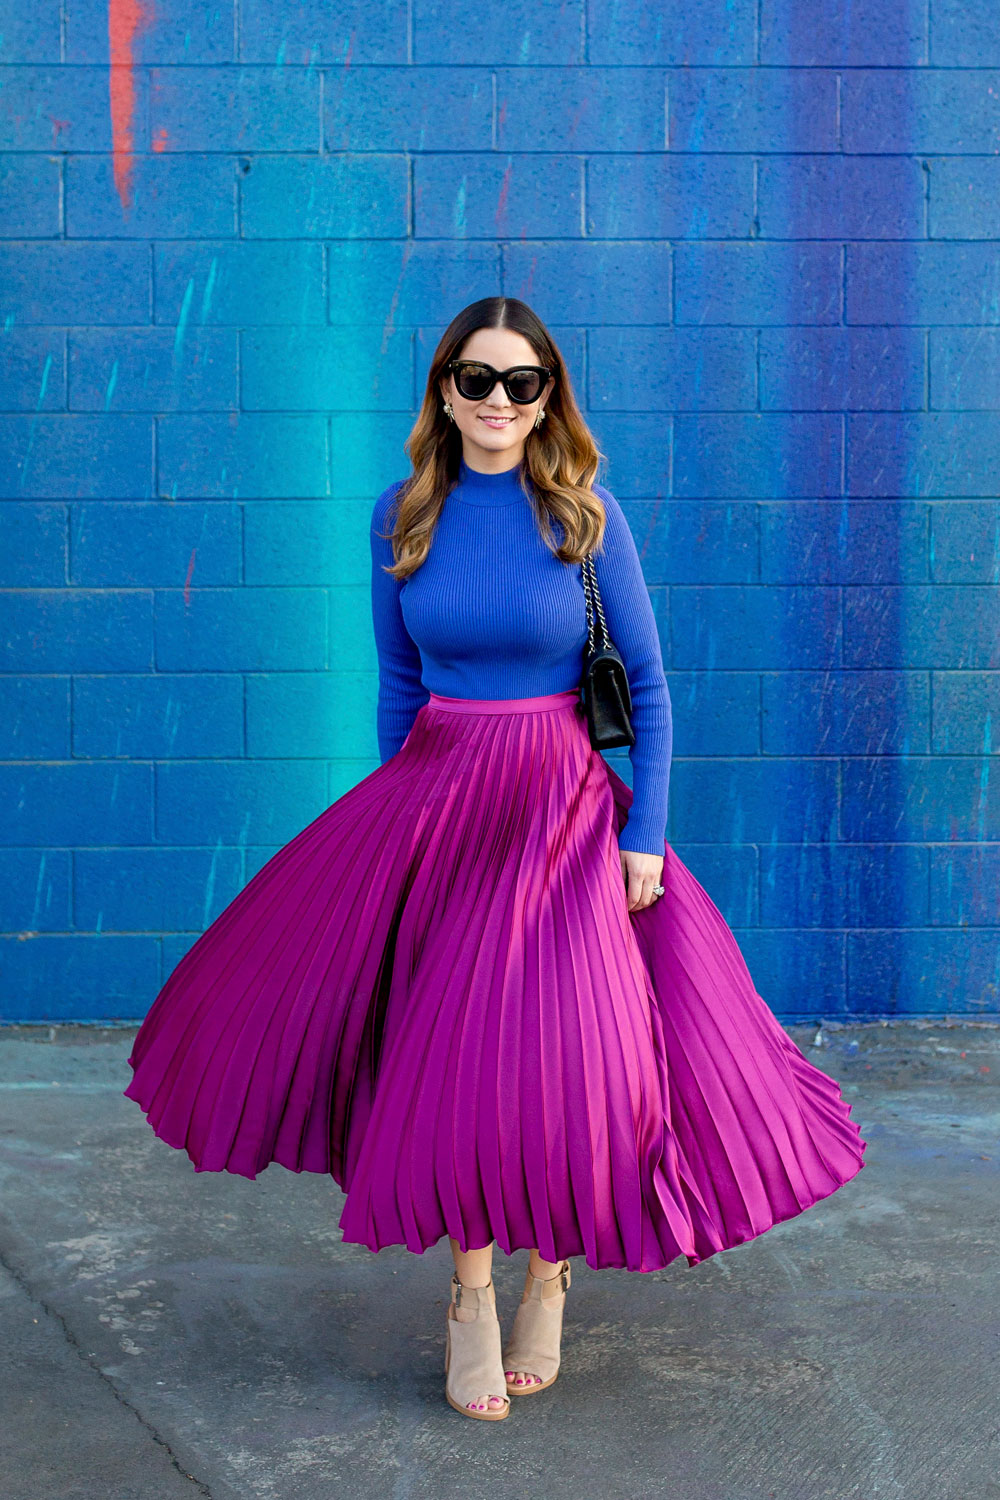 Jennifer Lake Style Charade twirling in an ASOS purple pleated midi skirt, cobalt blue sweater bodysuit and Chanel quilted flap bag at a dripping paint wall in Los Angeles